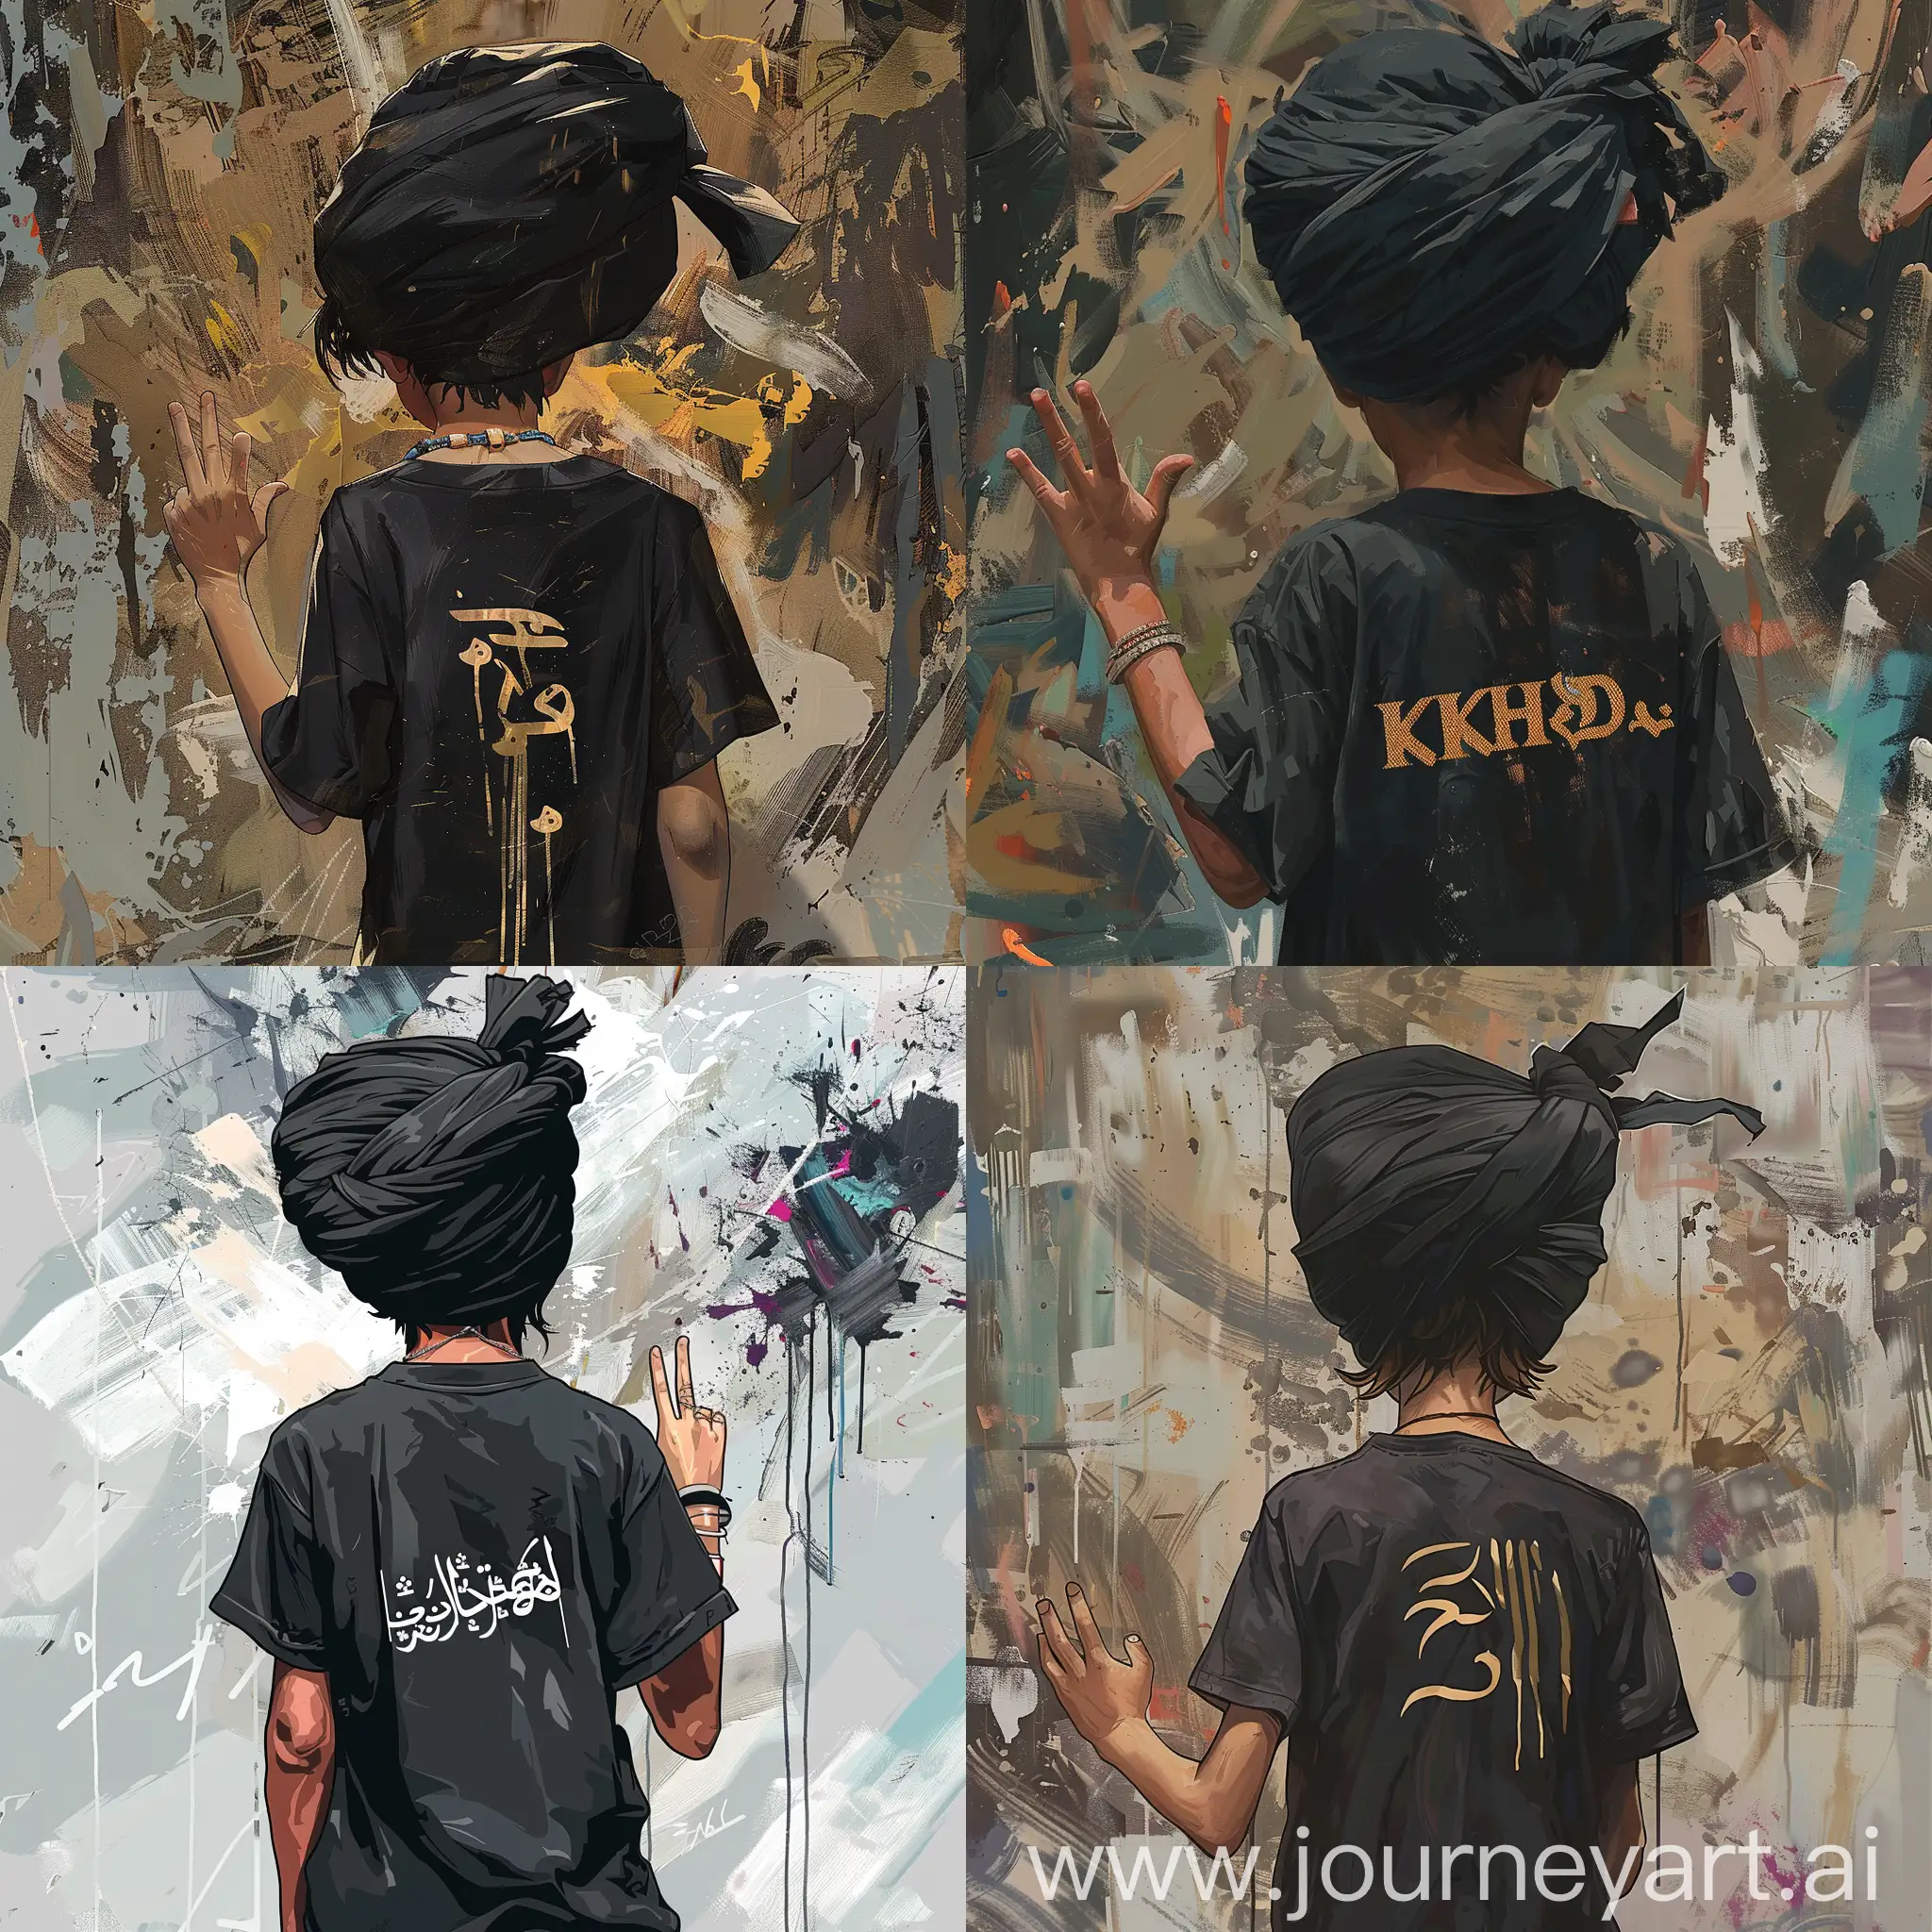 a sikh teenger boy with black t shirt,back view,on his t Shirt back Khanda is printed,he is weairng black turban,cool hand sign,background is artsitic work which defines criticism against him,Anime style with mix of artistic painting style.